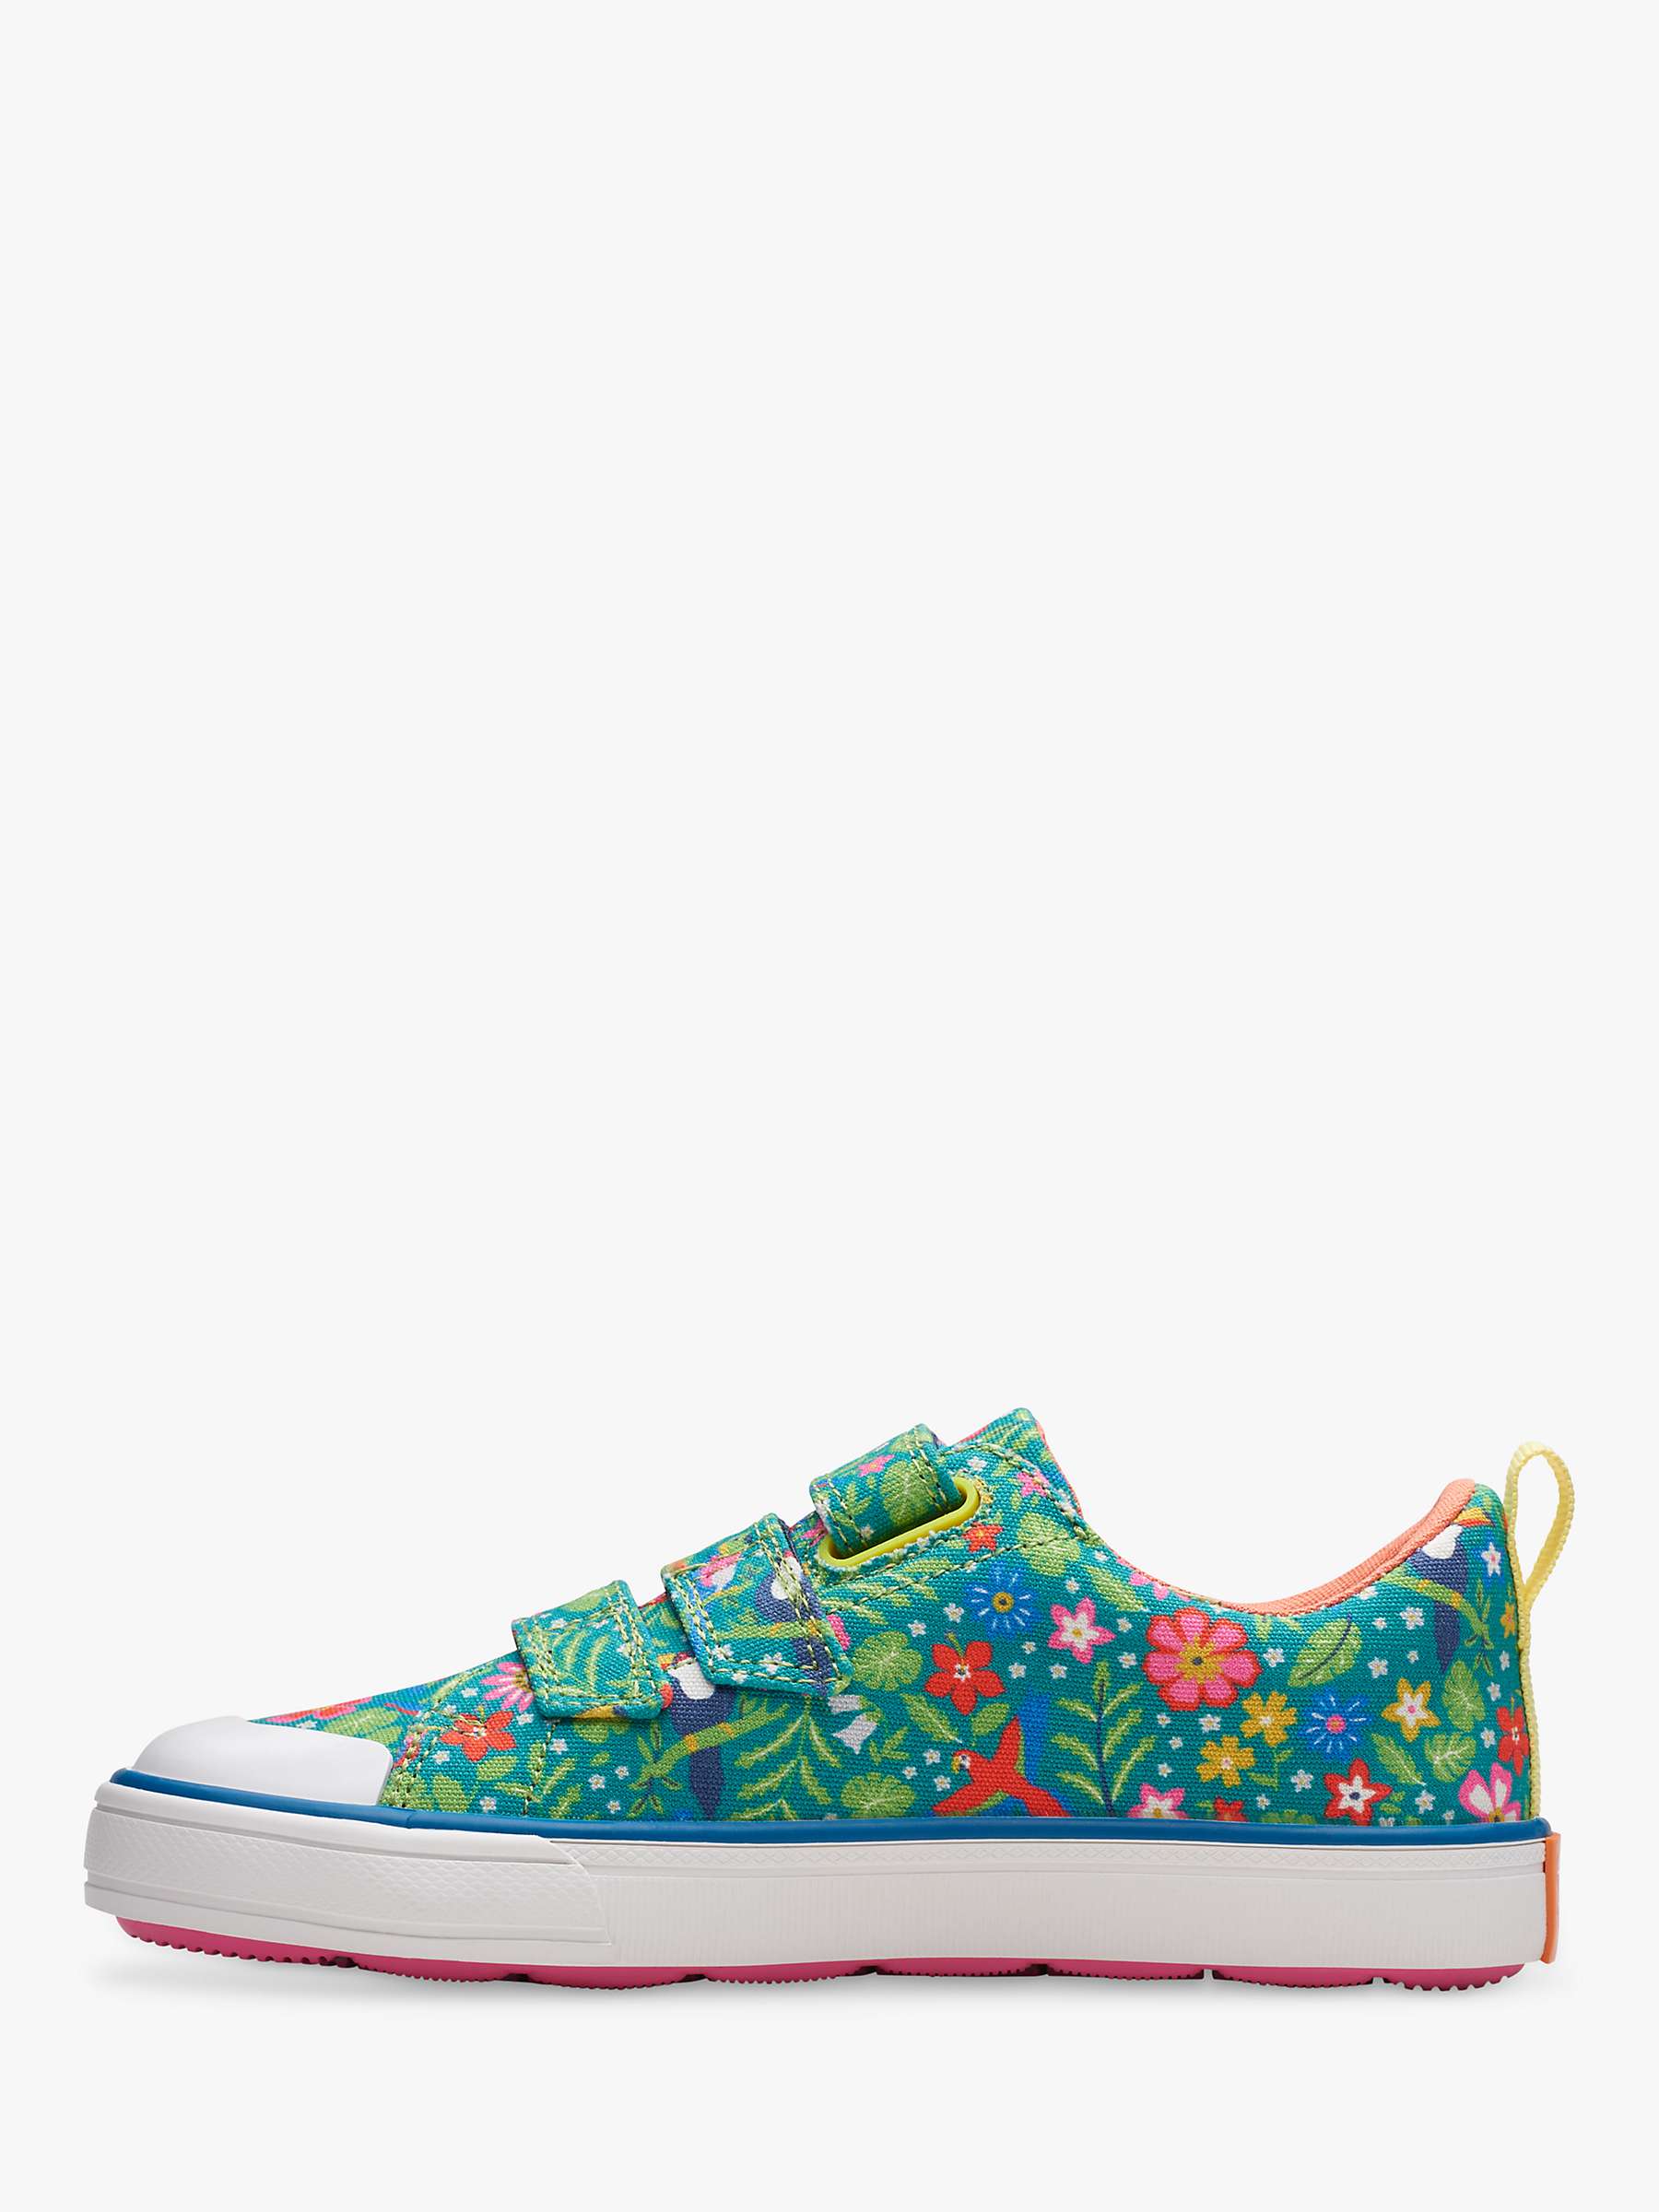 Buy Clarks Kids' Clarks x Frugi Foxing Tropic Trainers, Green Online at johnlewis.com